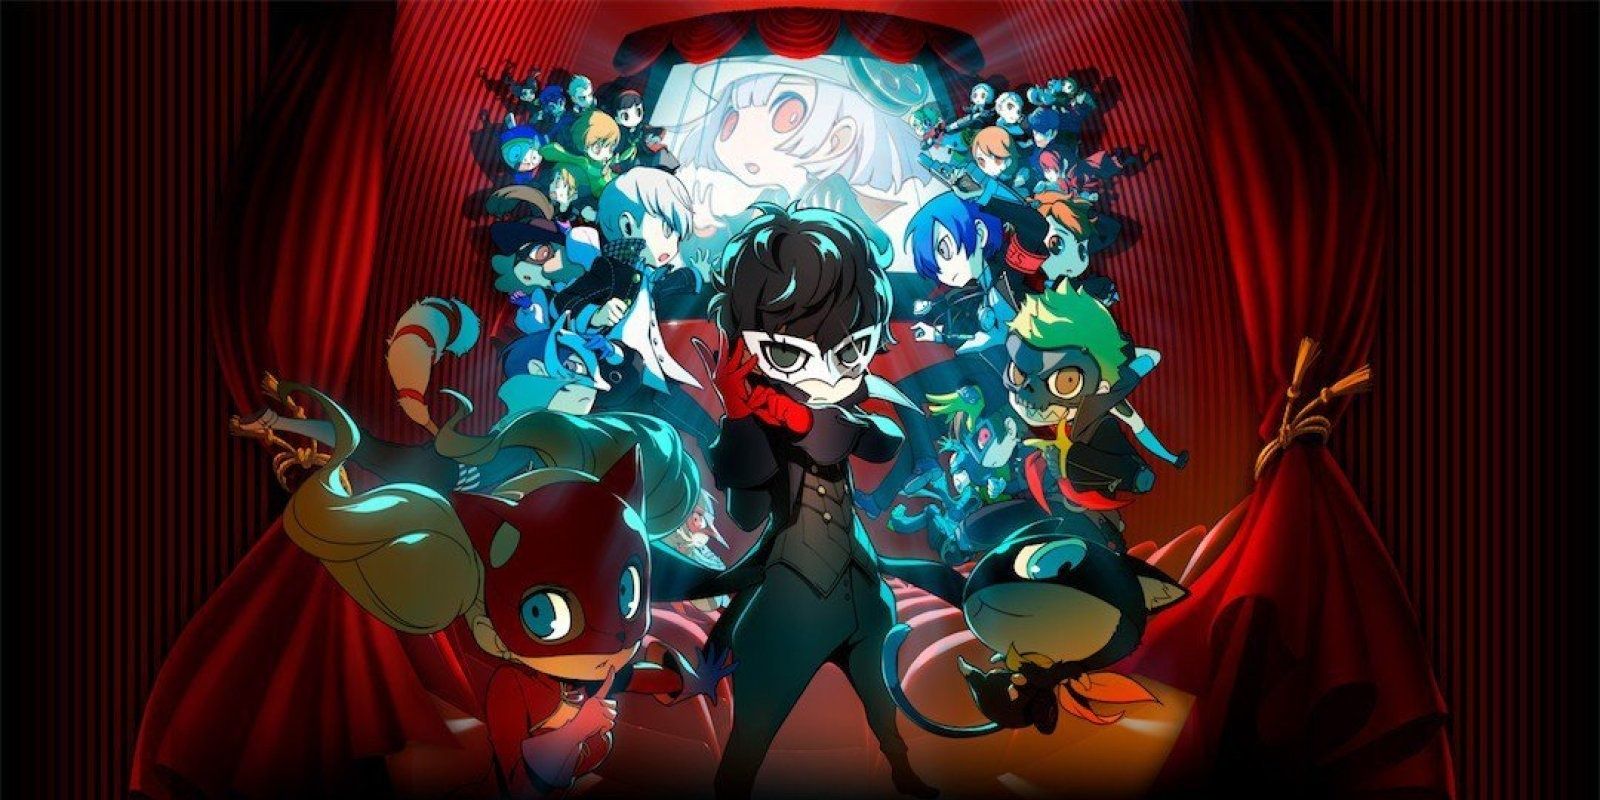 Joker and the cast of the Persona games stand in front of a projection screen